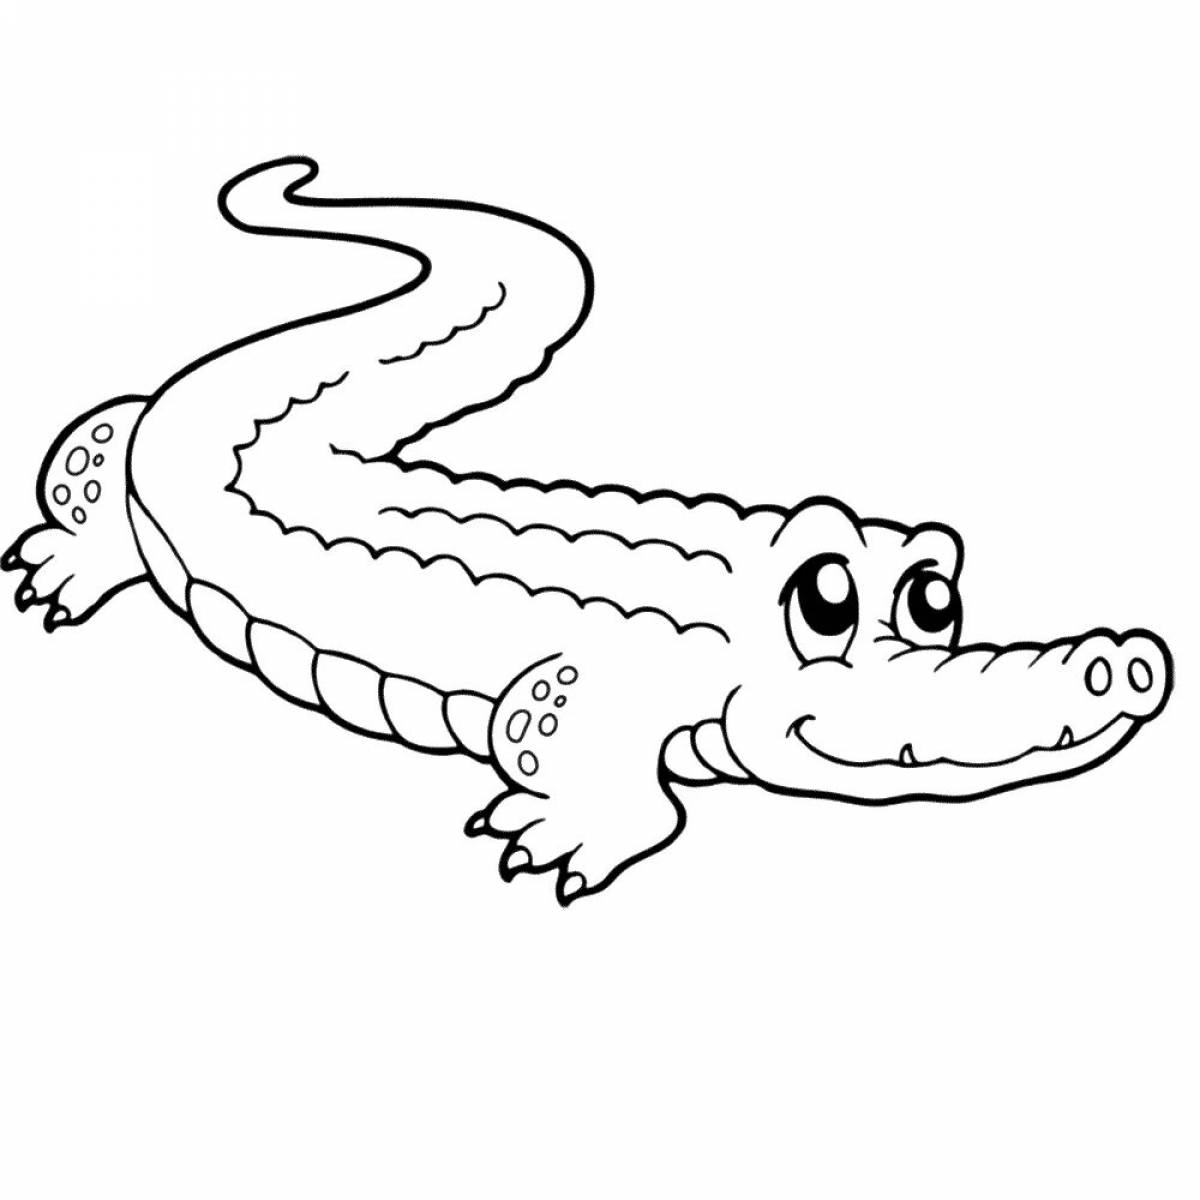 Color-dynamic coloring crocodile for children 3-4 years old